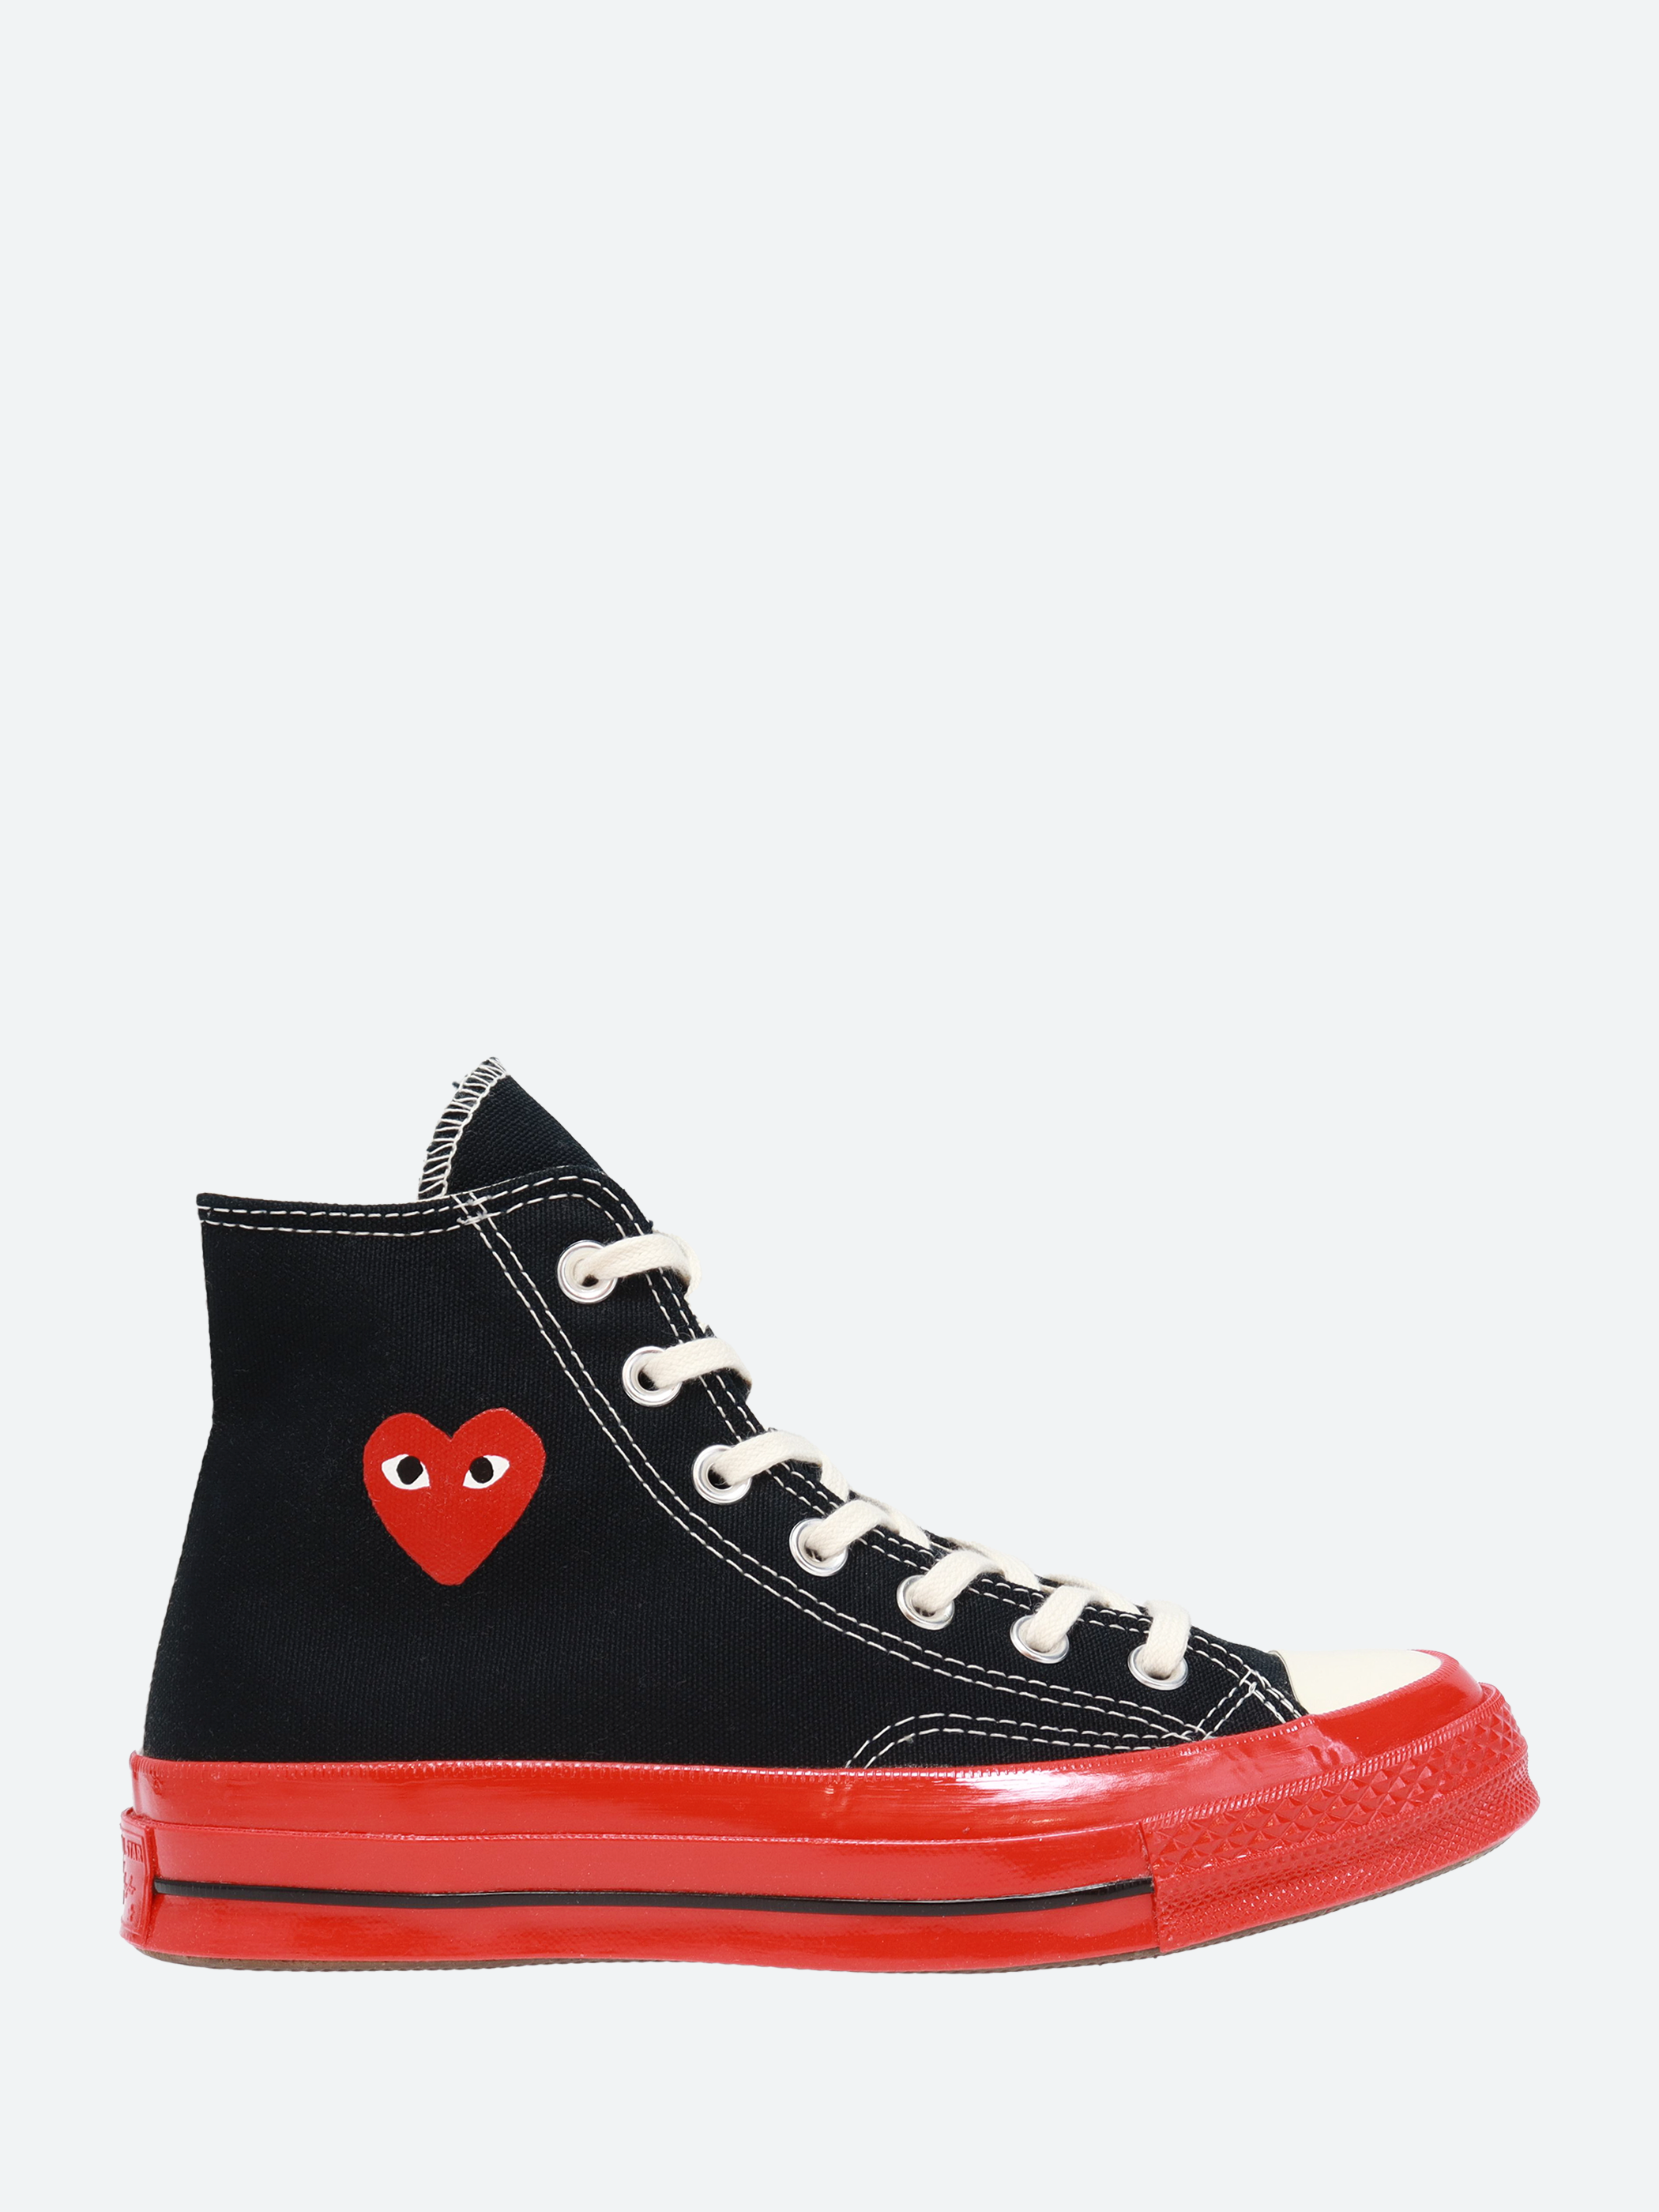 Red Sole Chuck 70 High Top